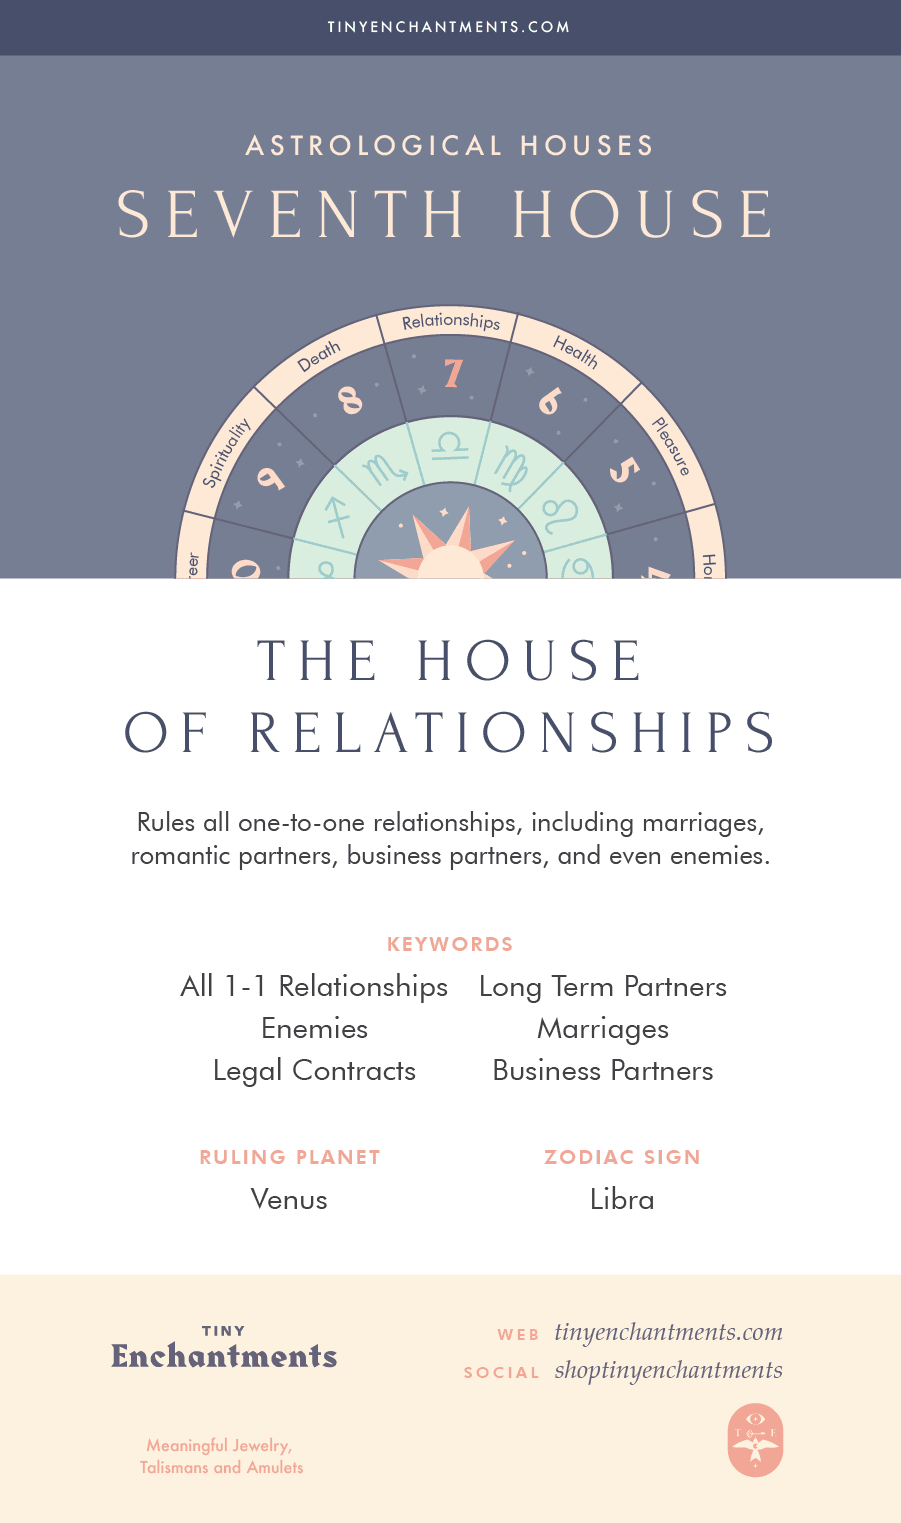 35 In Astrology What Is The 7th House - Astrology Today